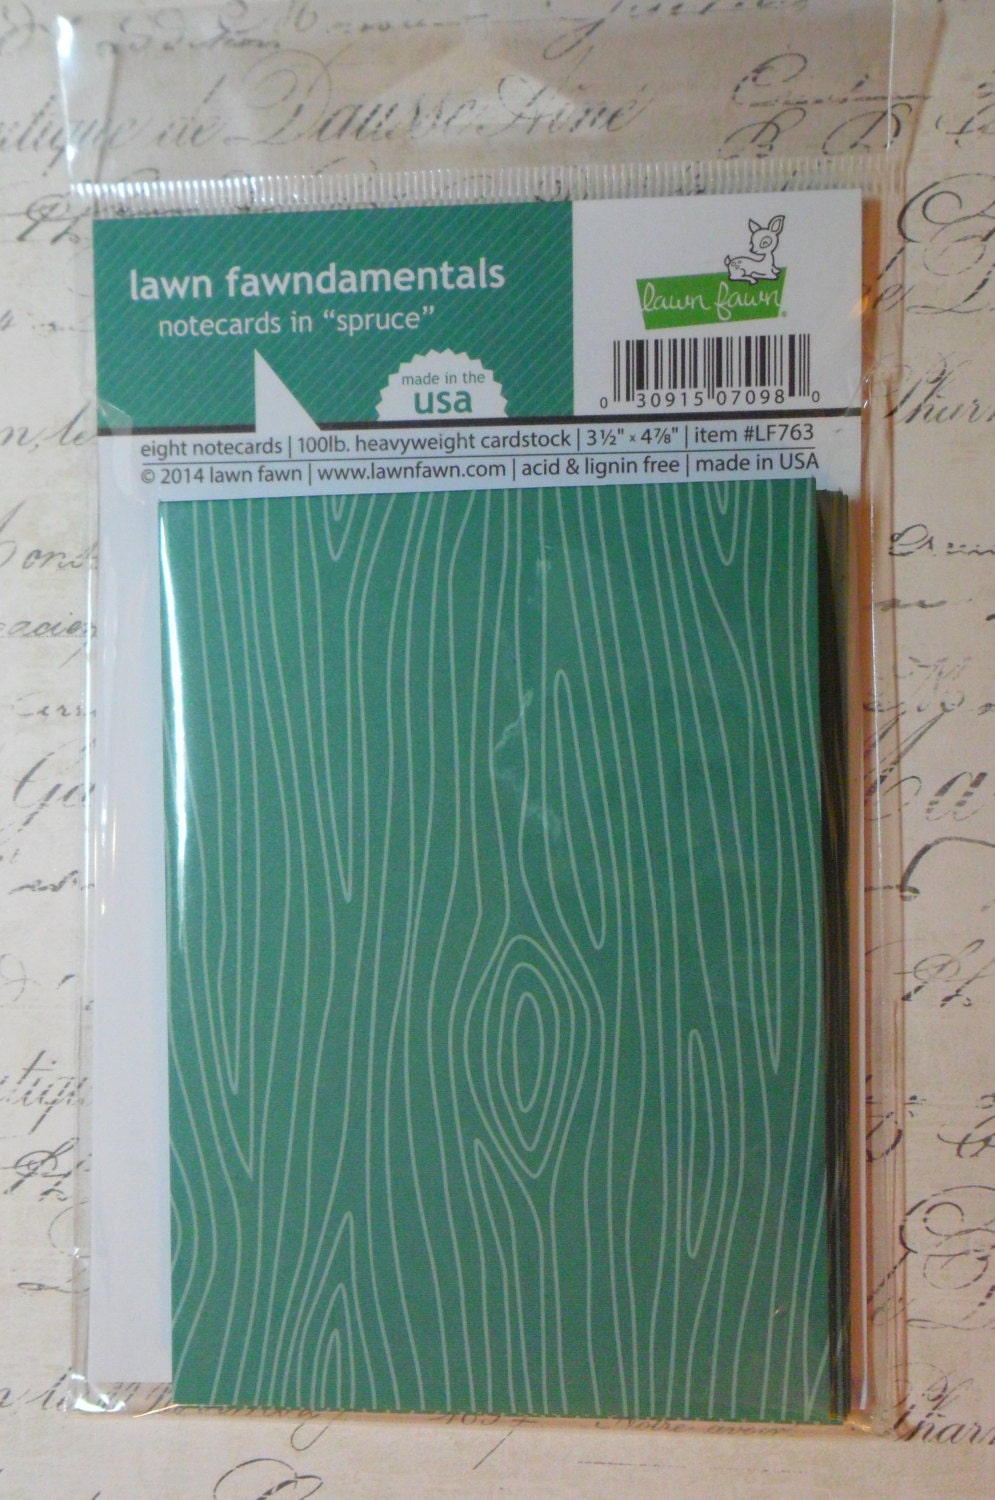 Lawn Fawn: Fawndamentals Notecards in Spruce - 8 Card Set - Approx 3.5 x 4.75 inches